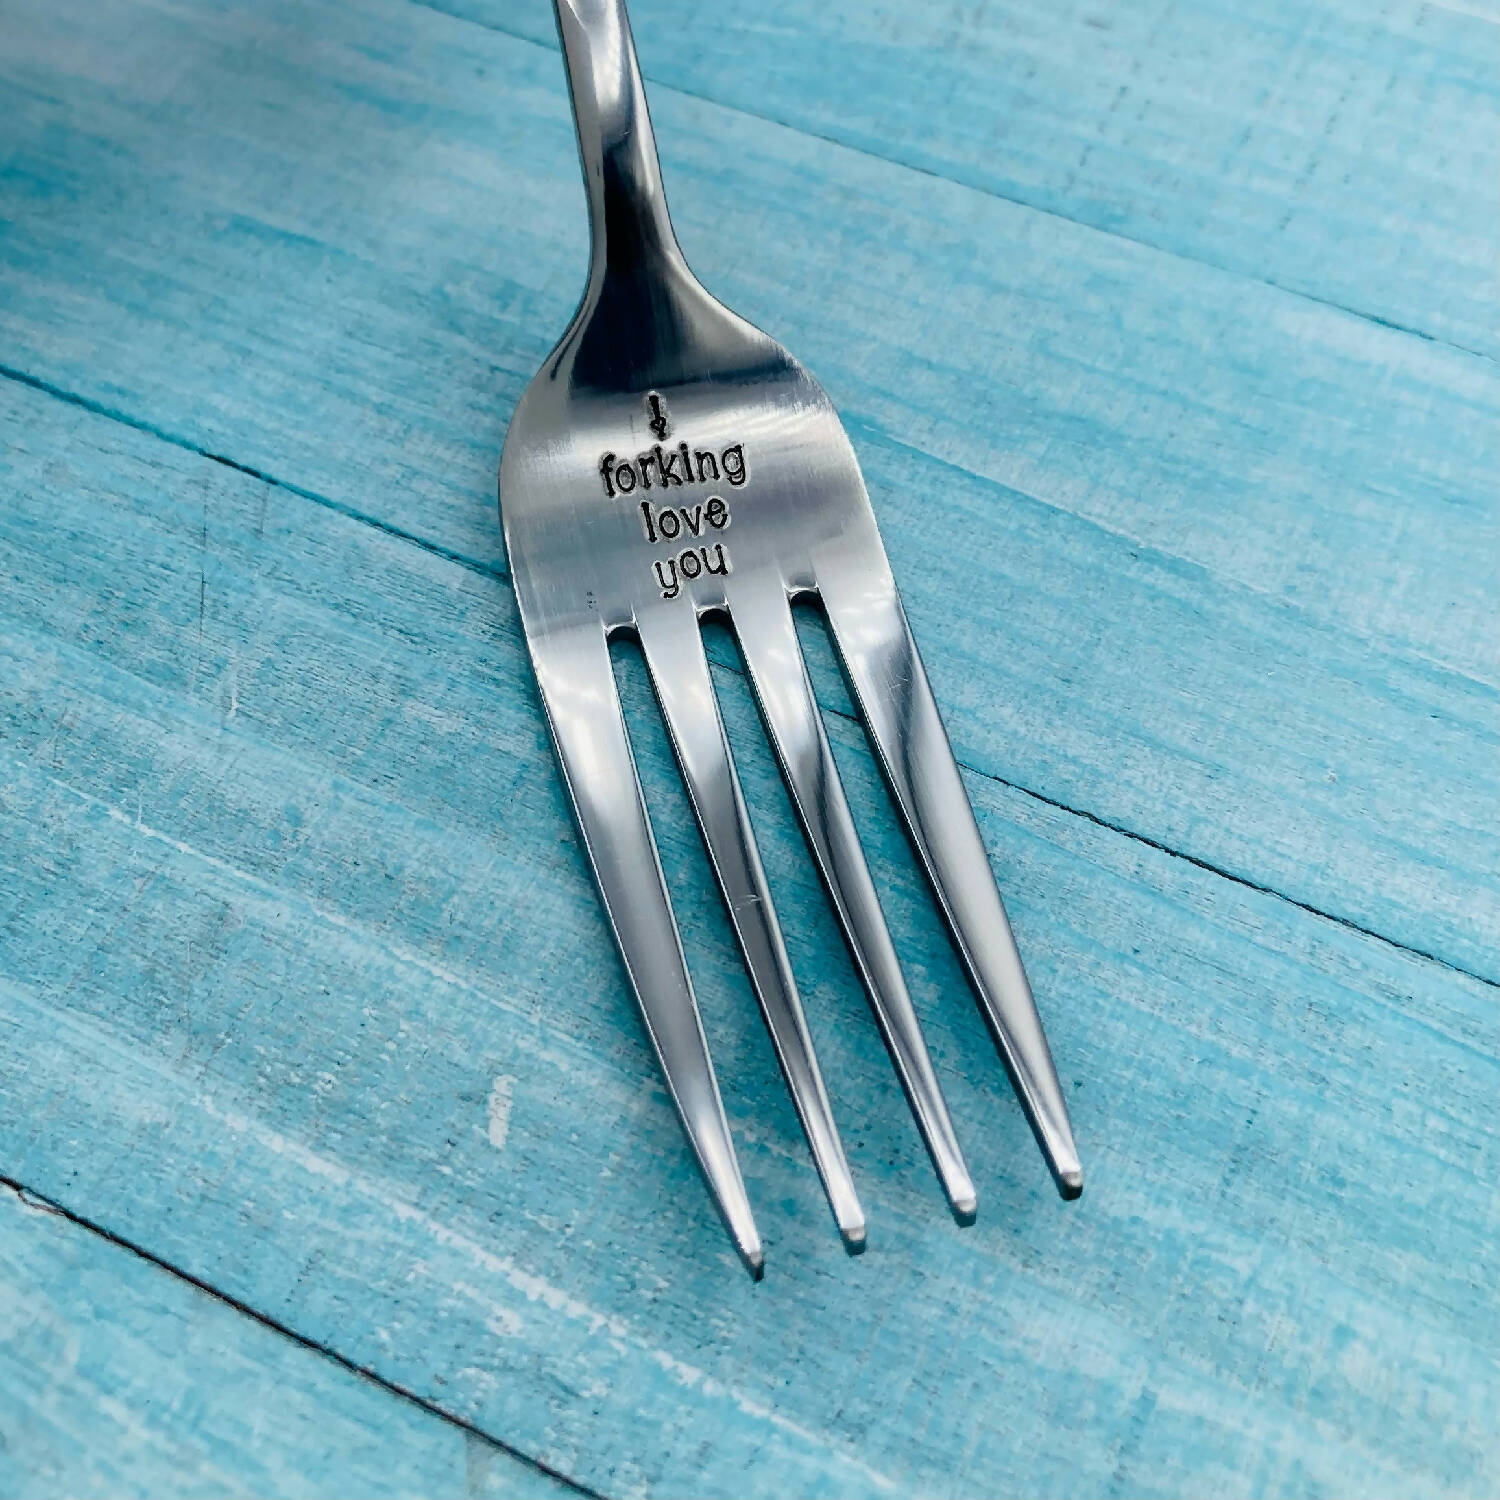 Cutlery - I forking love you fork